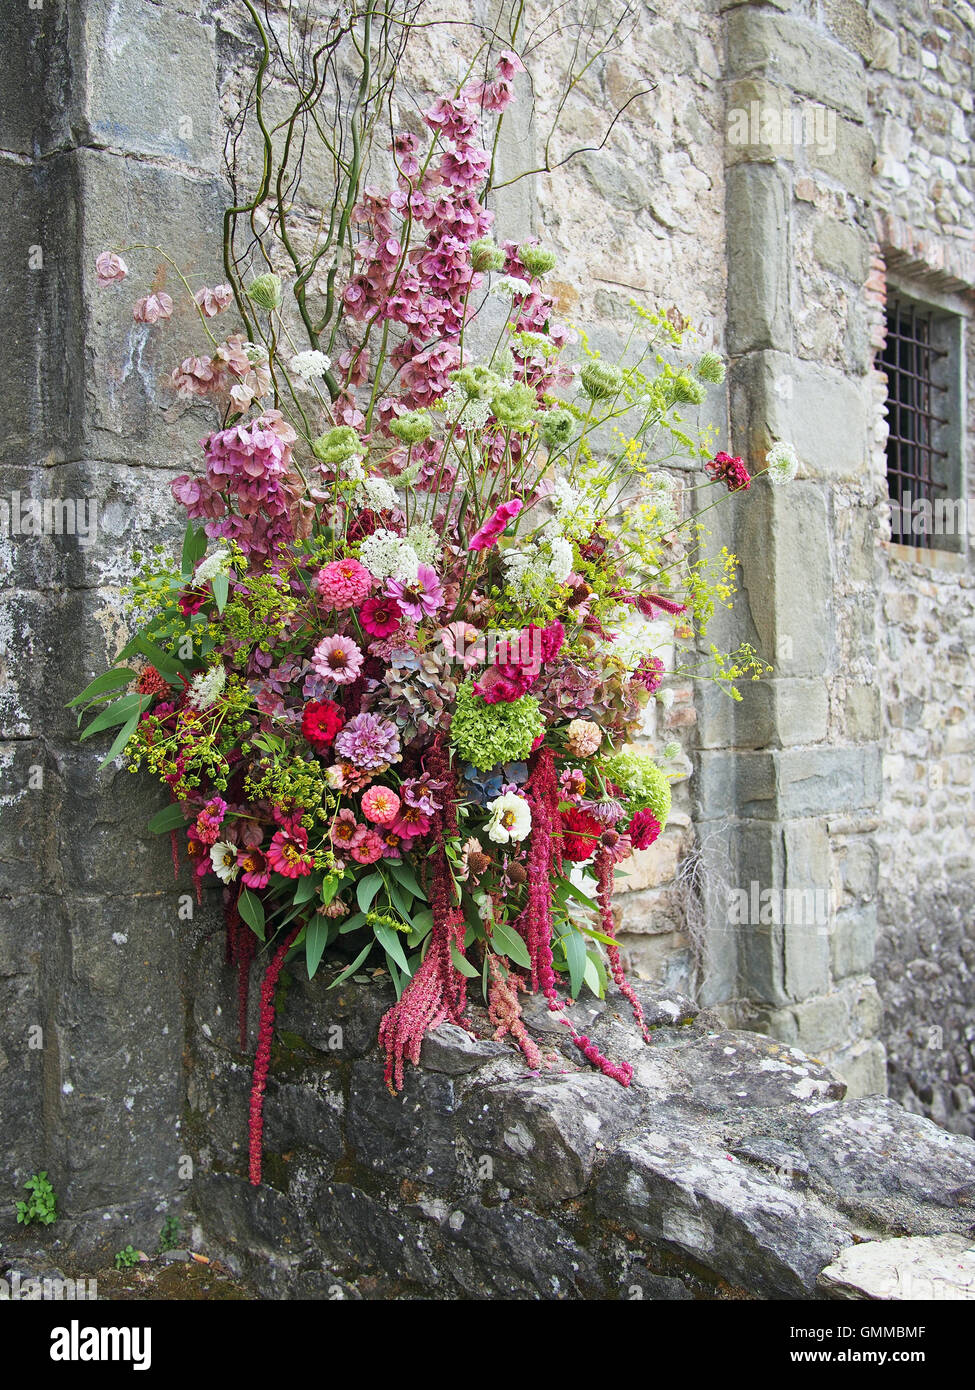 Outdoor floral arrangement, pastel shades. Against old grey stone building. Stock Photo